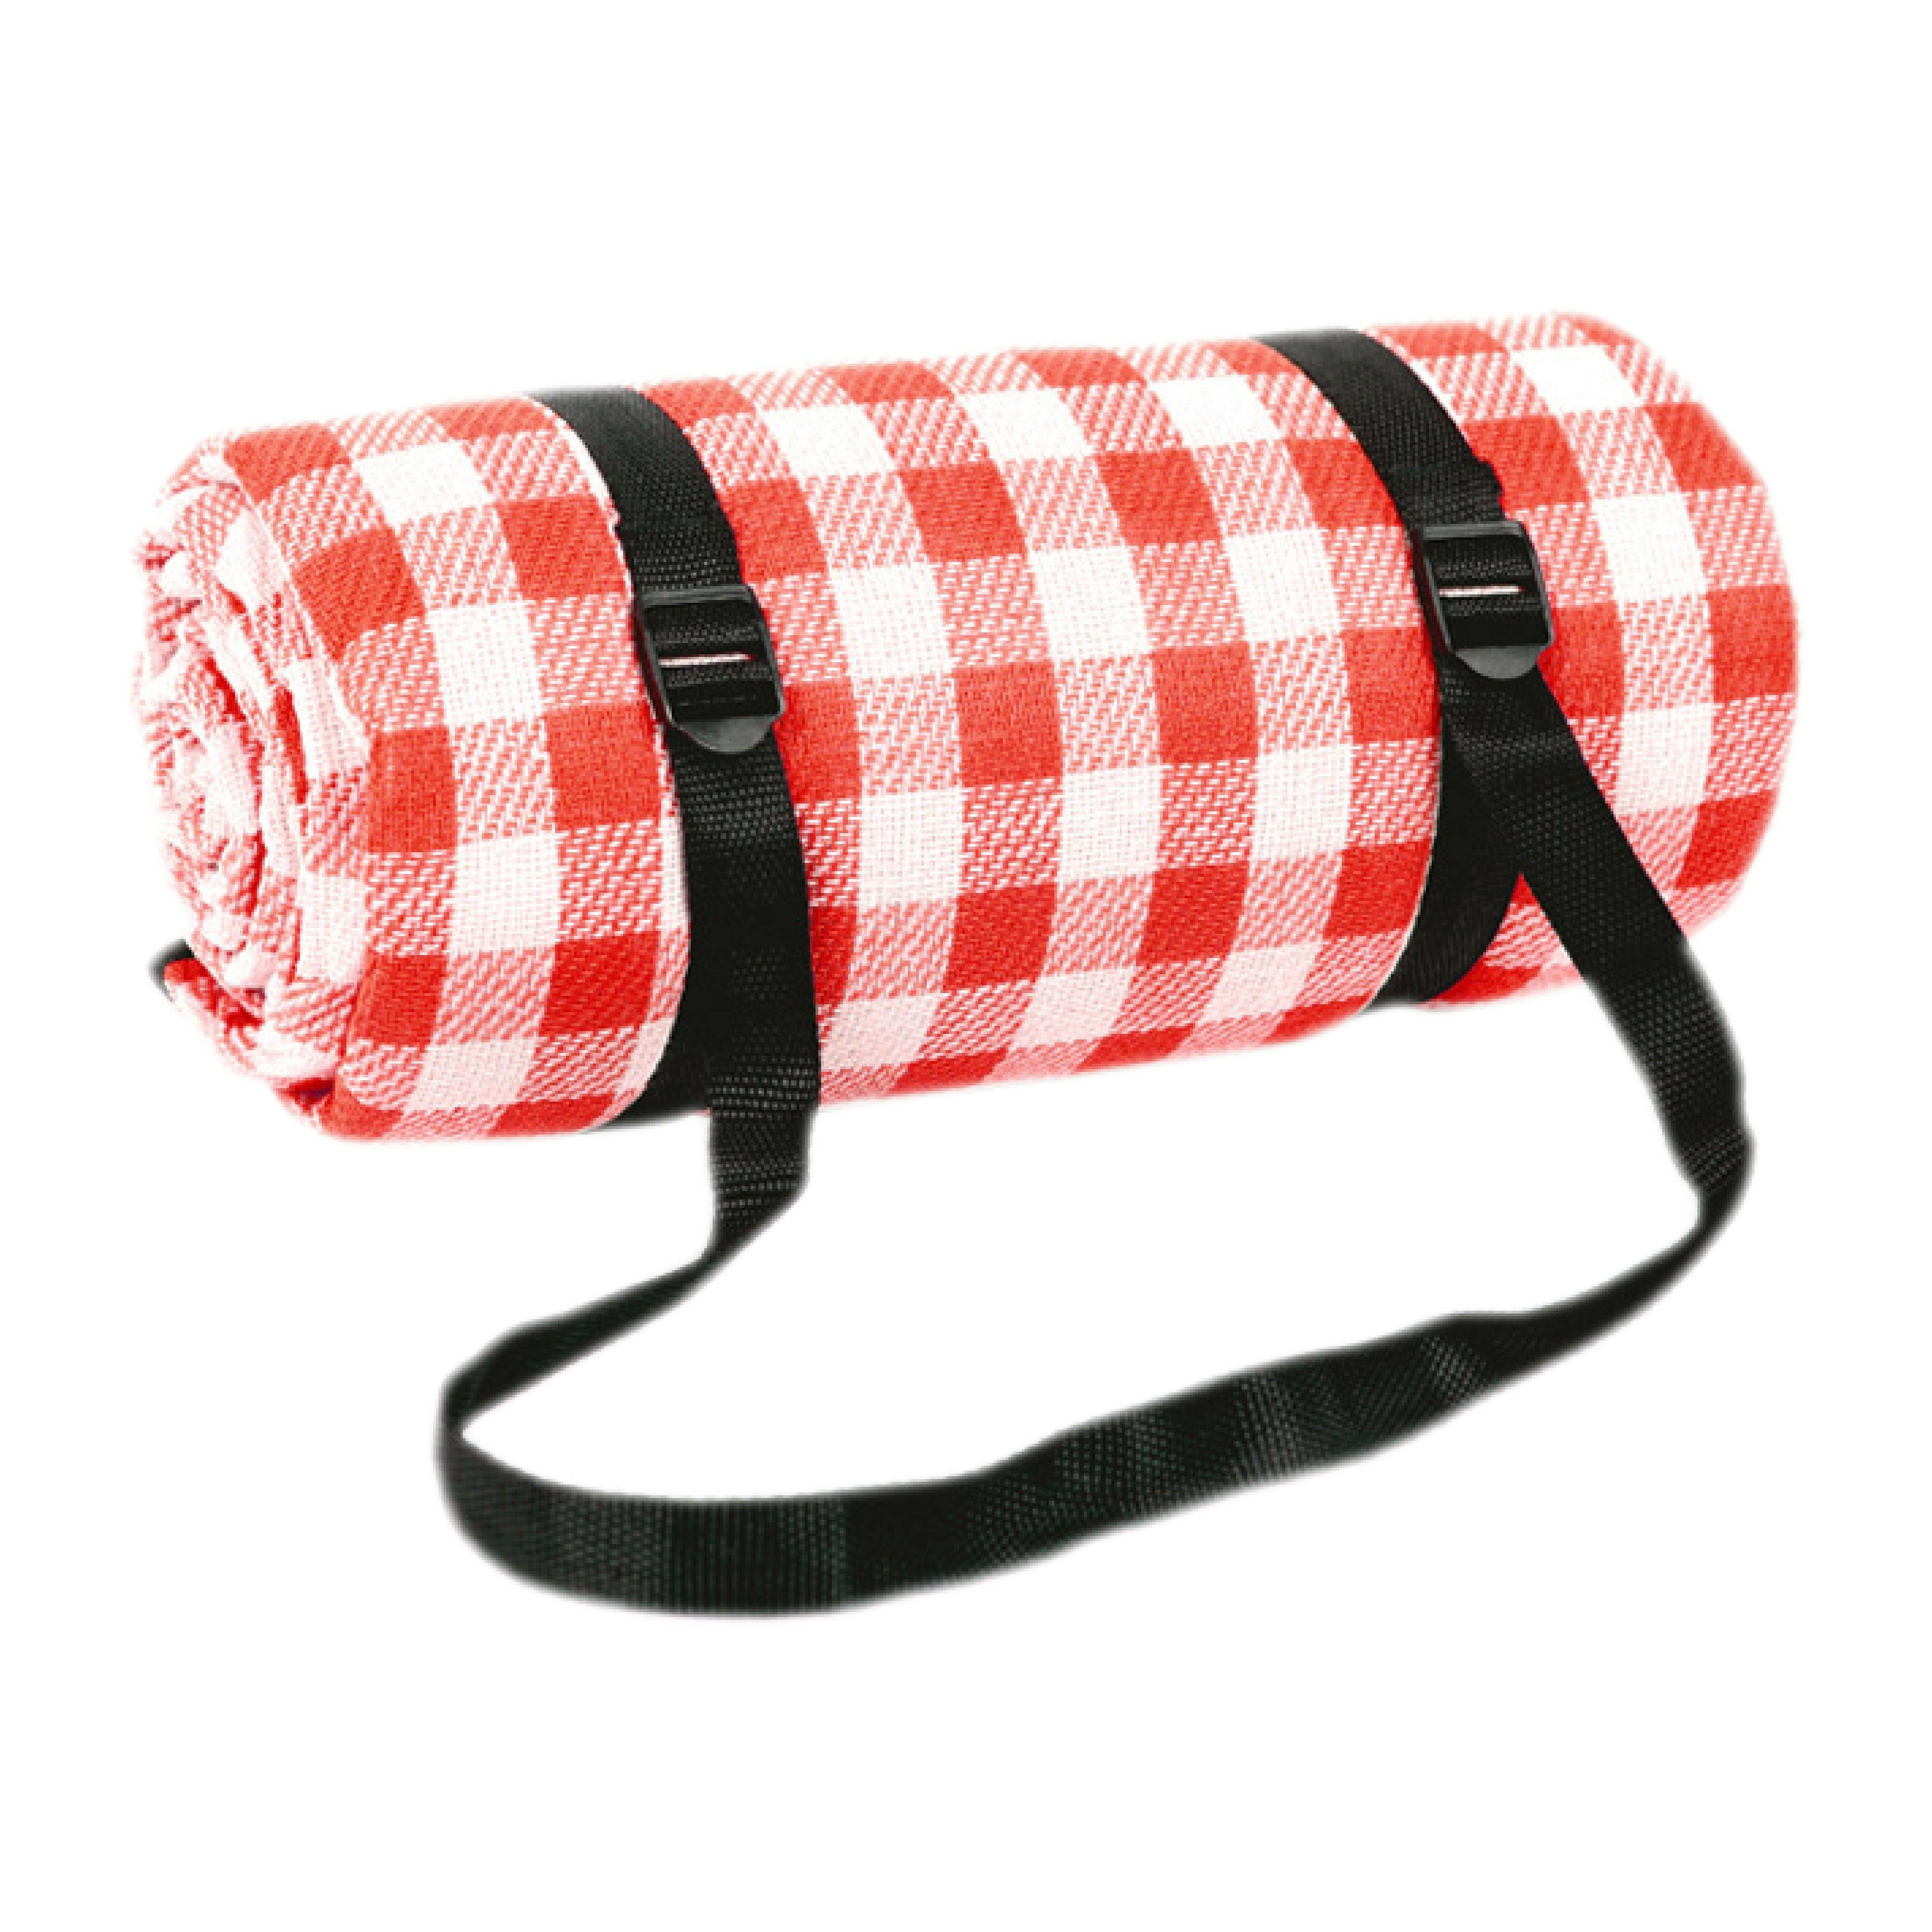 Outdoor Bees Premium Waterproof Picnic Blanket Camping Mat Red Grid | Outdoor Life | Brilliant Home Living